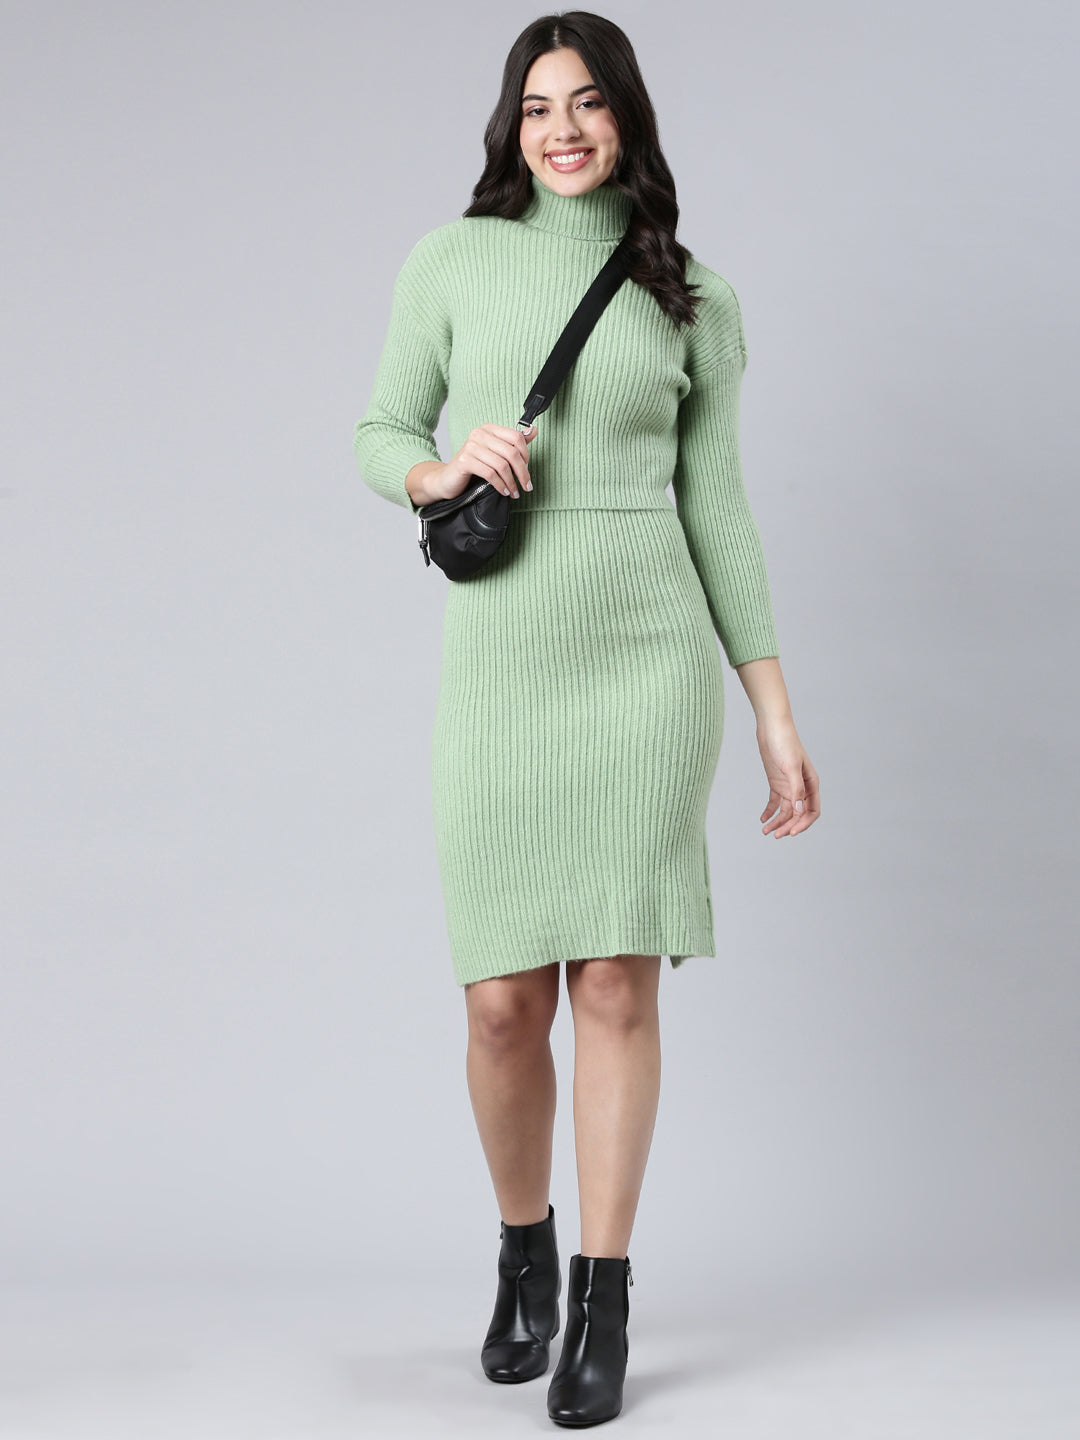 Women Self Design Green Bodycon Dress Comes with Top